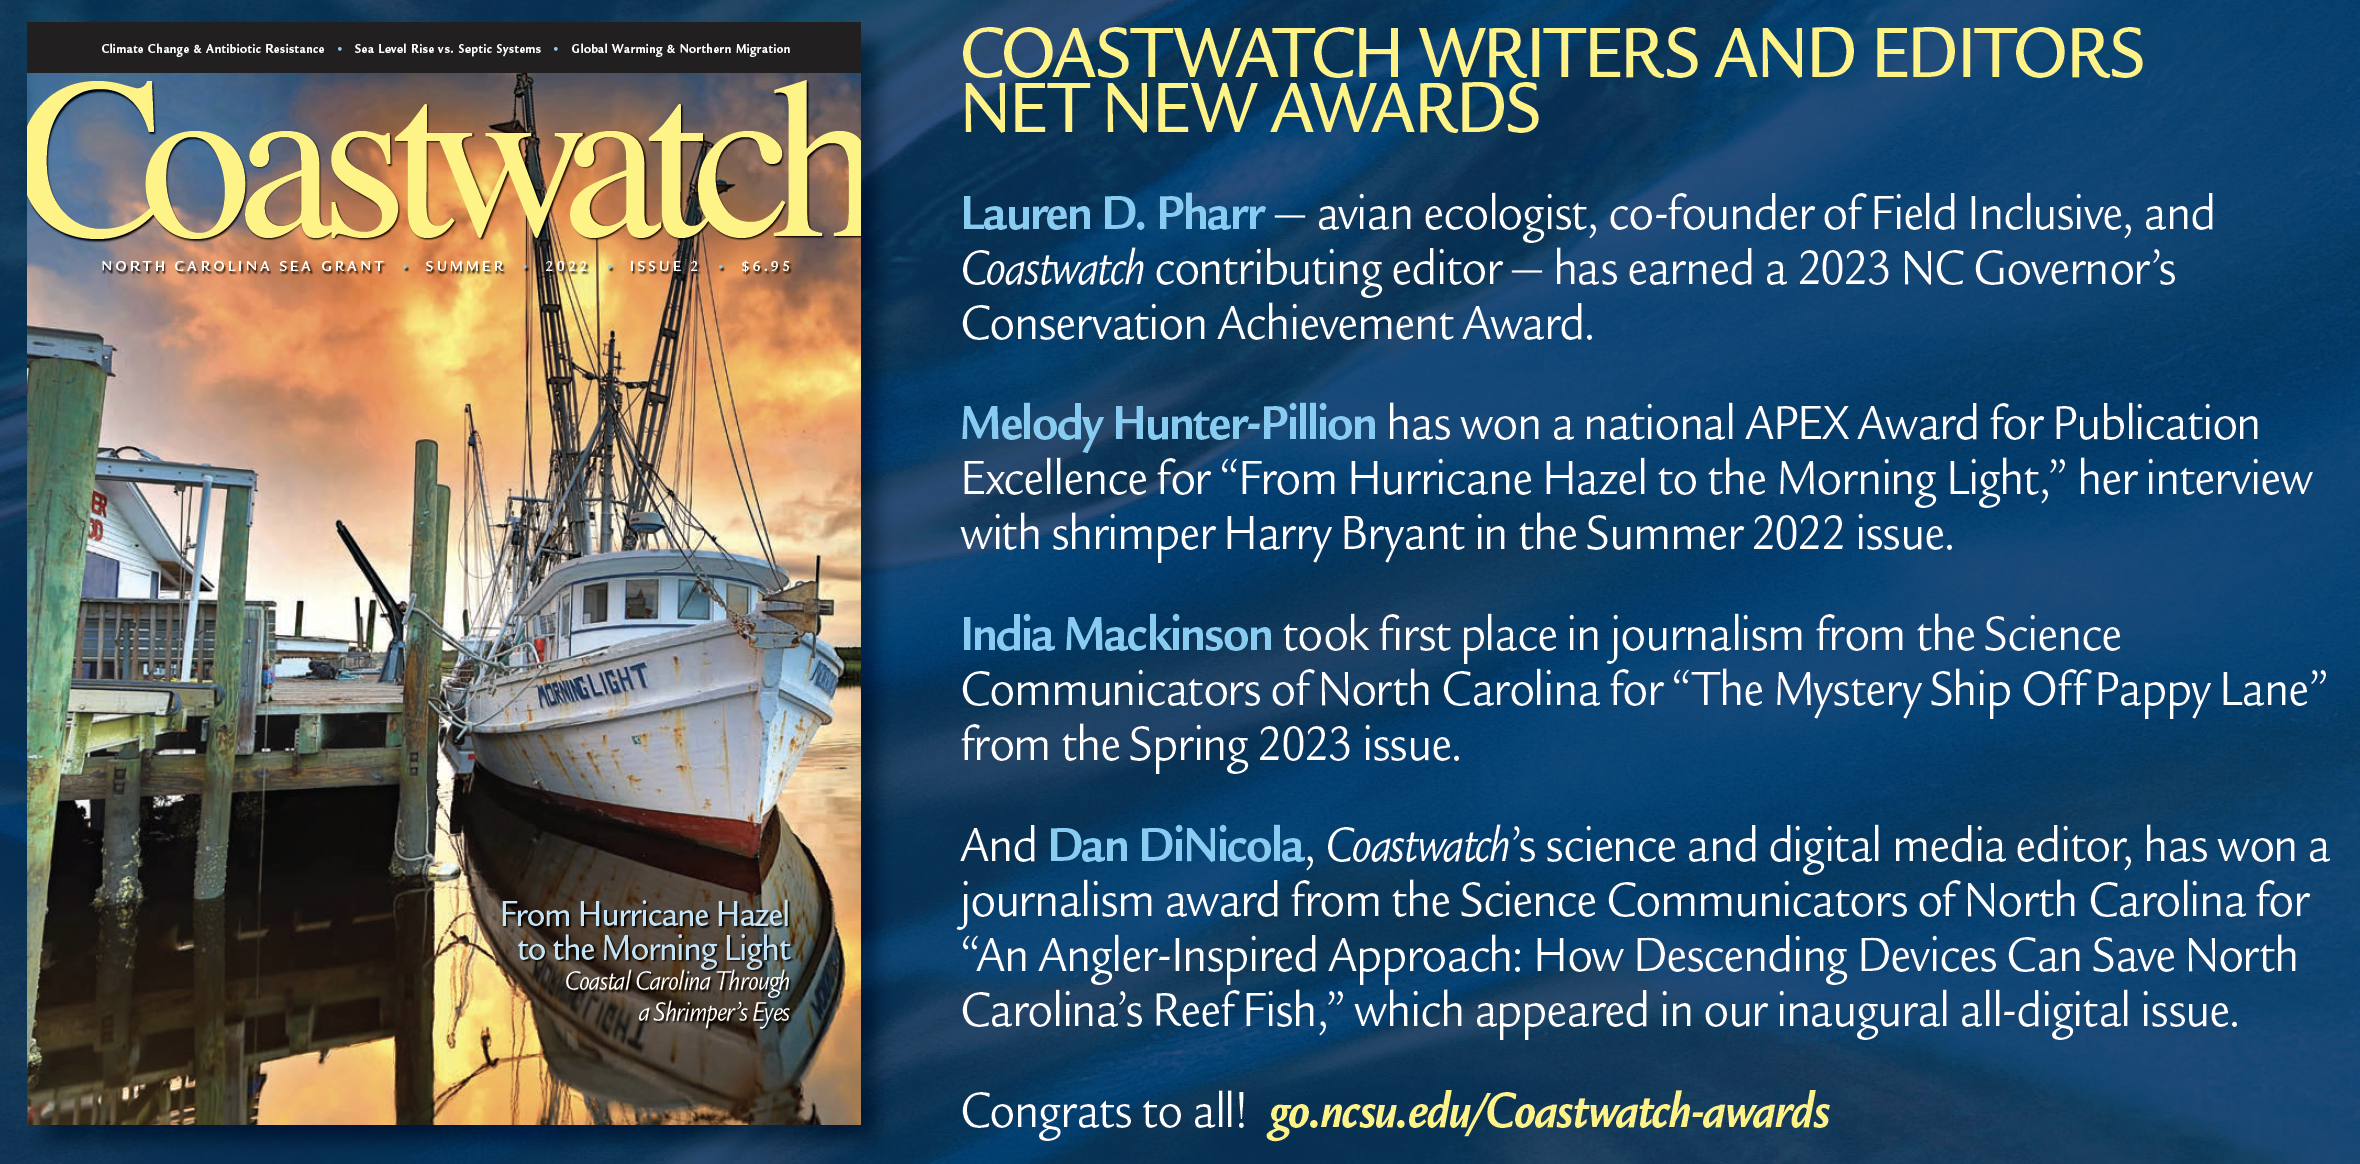 COASTWATCH WRITERS AND EDITORS NET NEW AWARDS Lauren D. Pharr — avian ecologist, co-founder of Field Inclusive, and Coastwatch contributing editor — has earned a 2023 NC Governor’s Conservation Achievement Award. Melody Hunter-Pillion has won a national APEX Award for Publication Excellence for “From Hurricane Hazel to the Morning Light,” her interview with shrimper Harry Bryant in the Summer 2022 issue. India Mackinson took first place in journalism from the Science Communicators of North Carolina for “The Mystery Ship Off Pappy Lane” from the Spring 2023 issue. And Dan DiNicola, Coastwatch’s science and digital media editor, has won a journalism award from the Science Communicators of North Carolina for “An Angler-Inspired Approach: How Descending Devices Can Save North Carolina’s Reef Fish,” which appeared in our inaugural all-digital issue. Congrats to all!